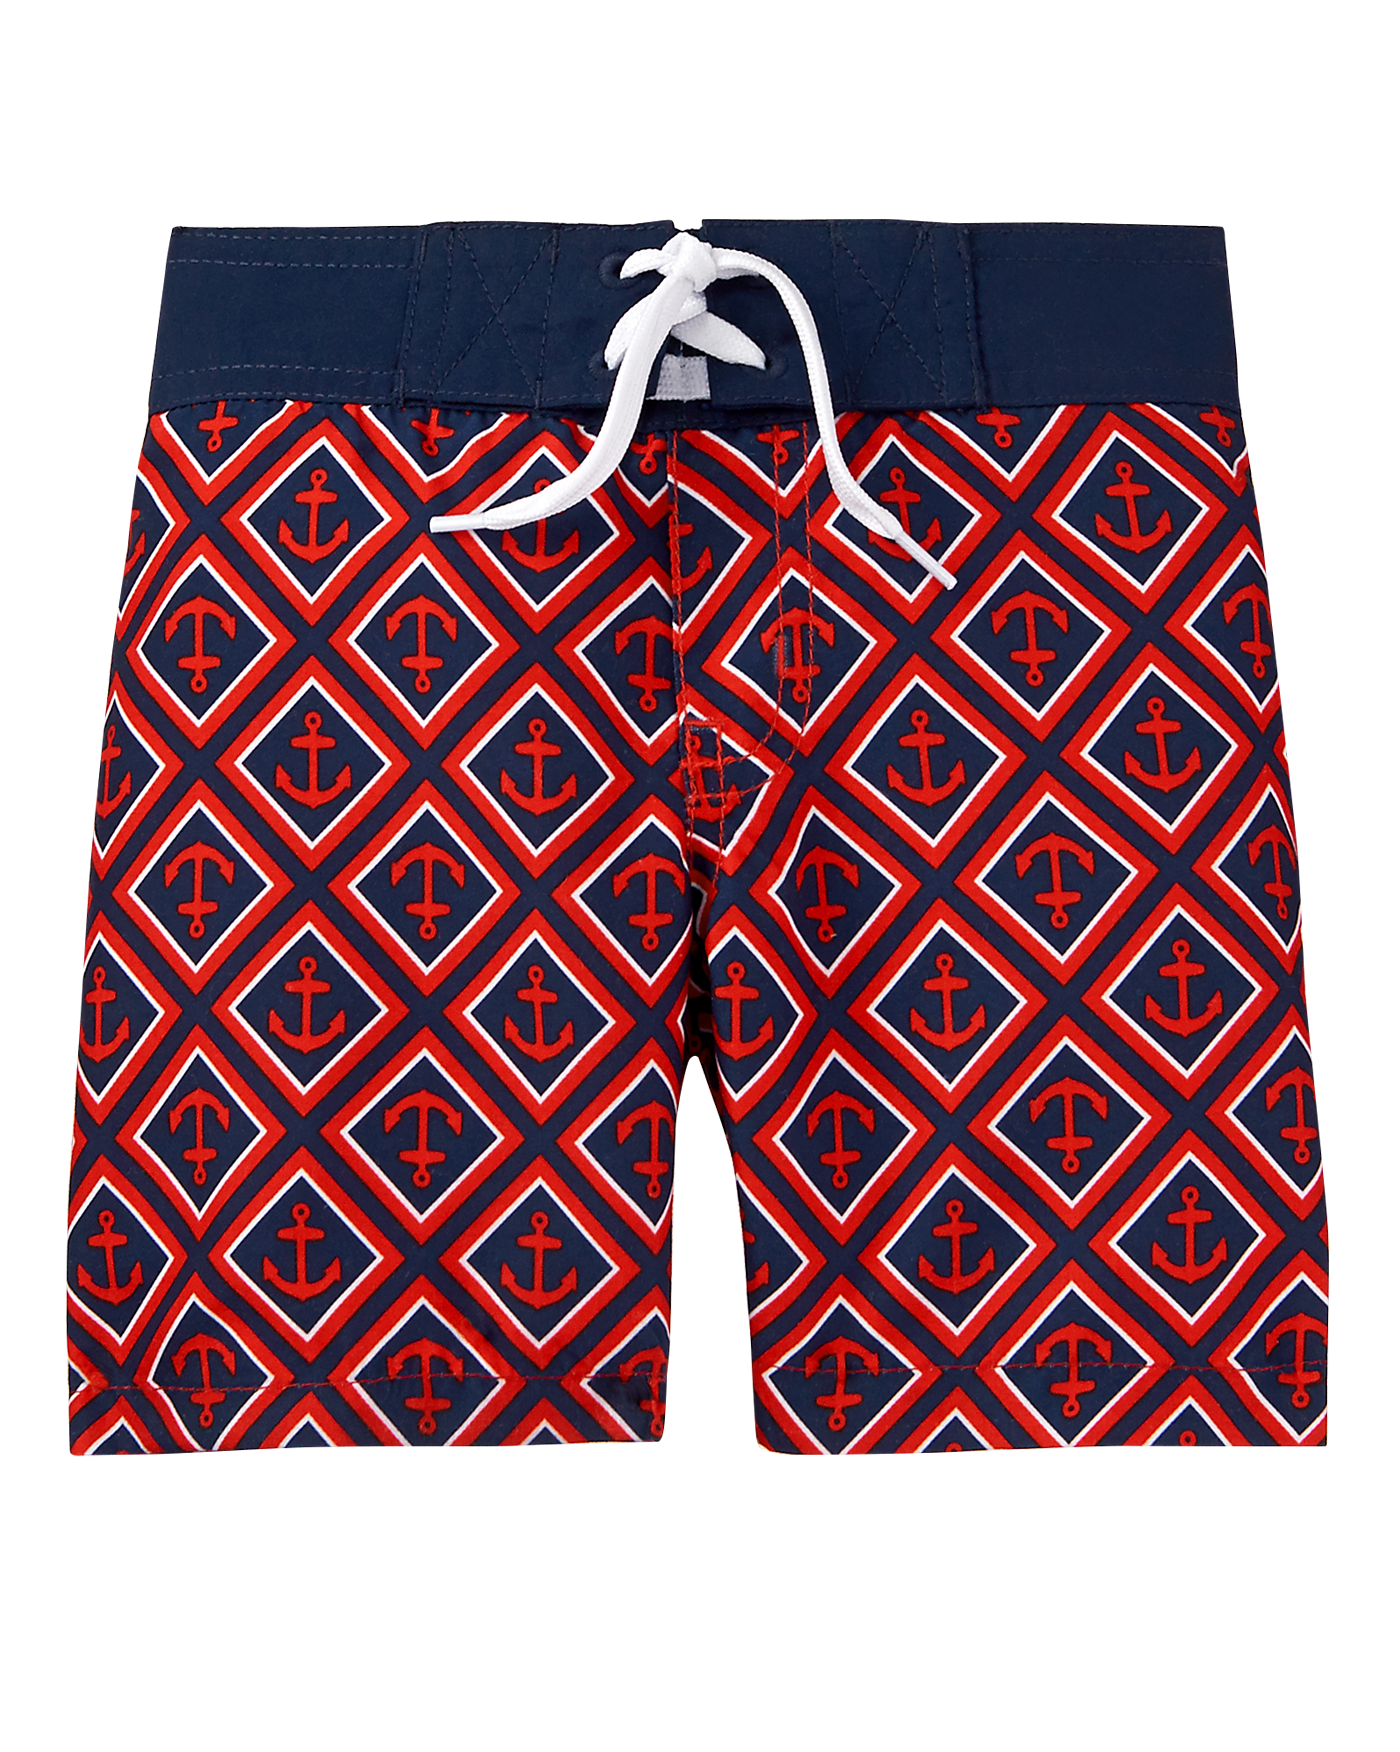 Anchor Swim Trunk image number 0